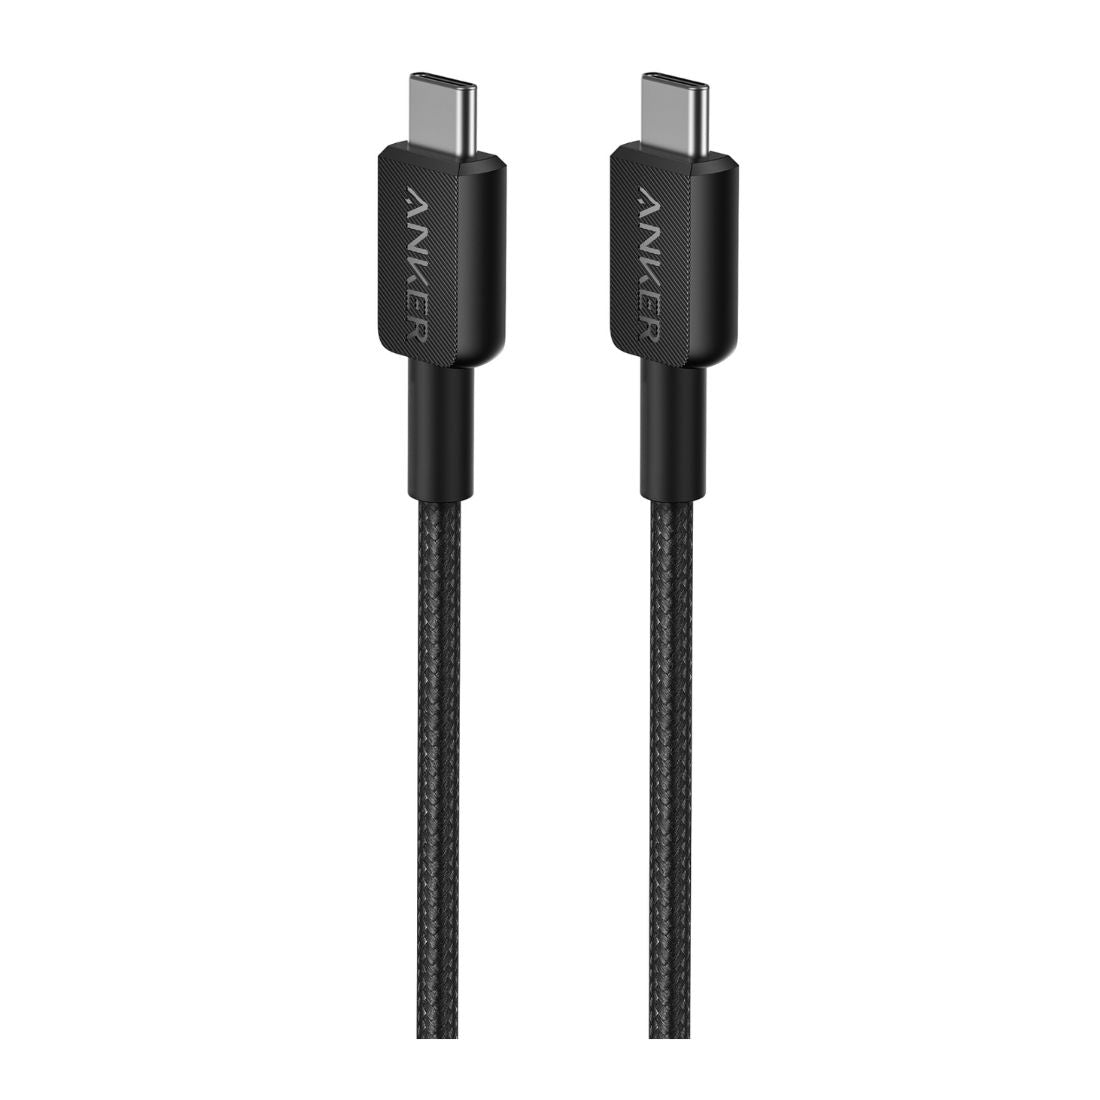 Anker A81F5H11  322 USB-C to USB-C Cable (0.9m Braided) - Black